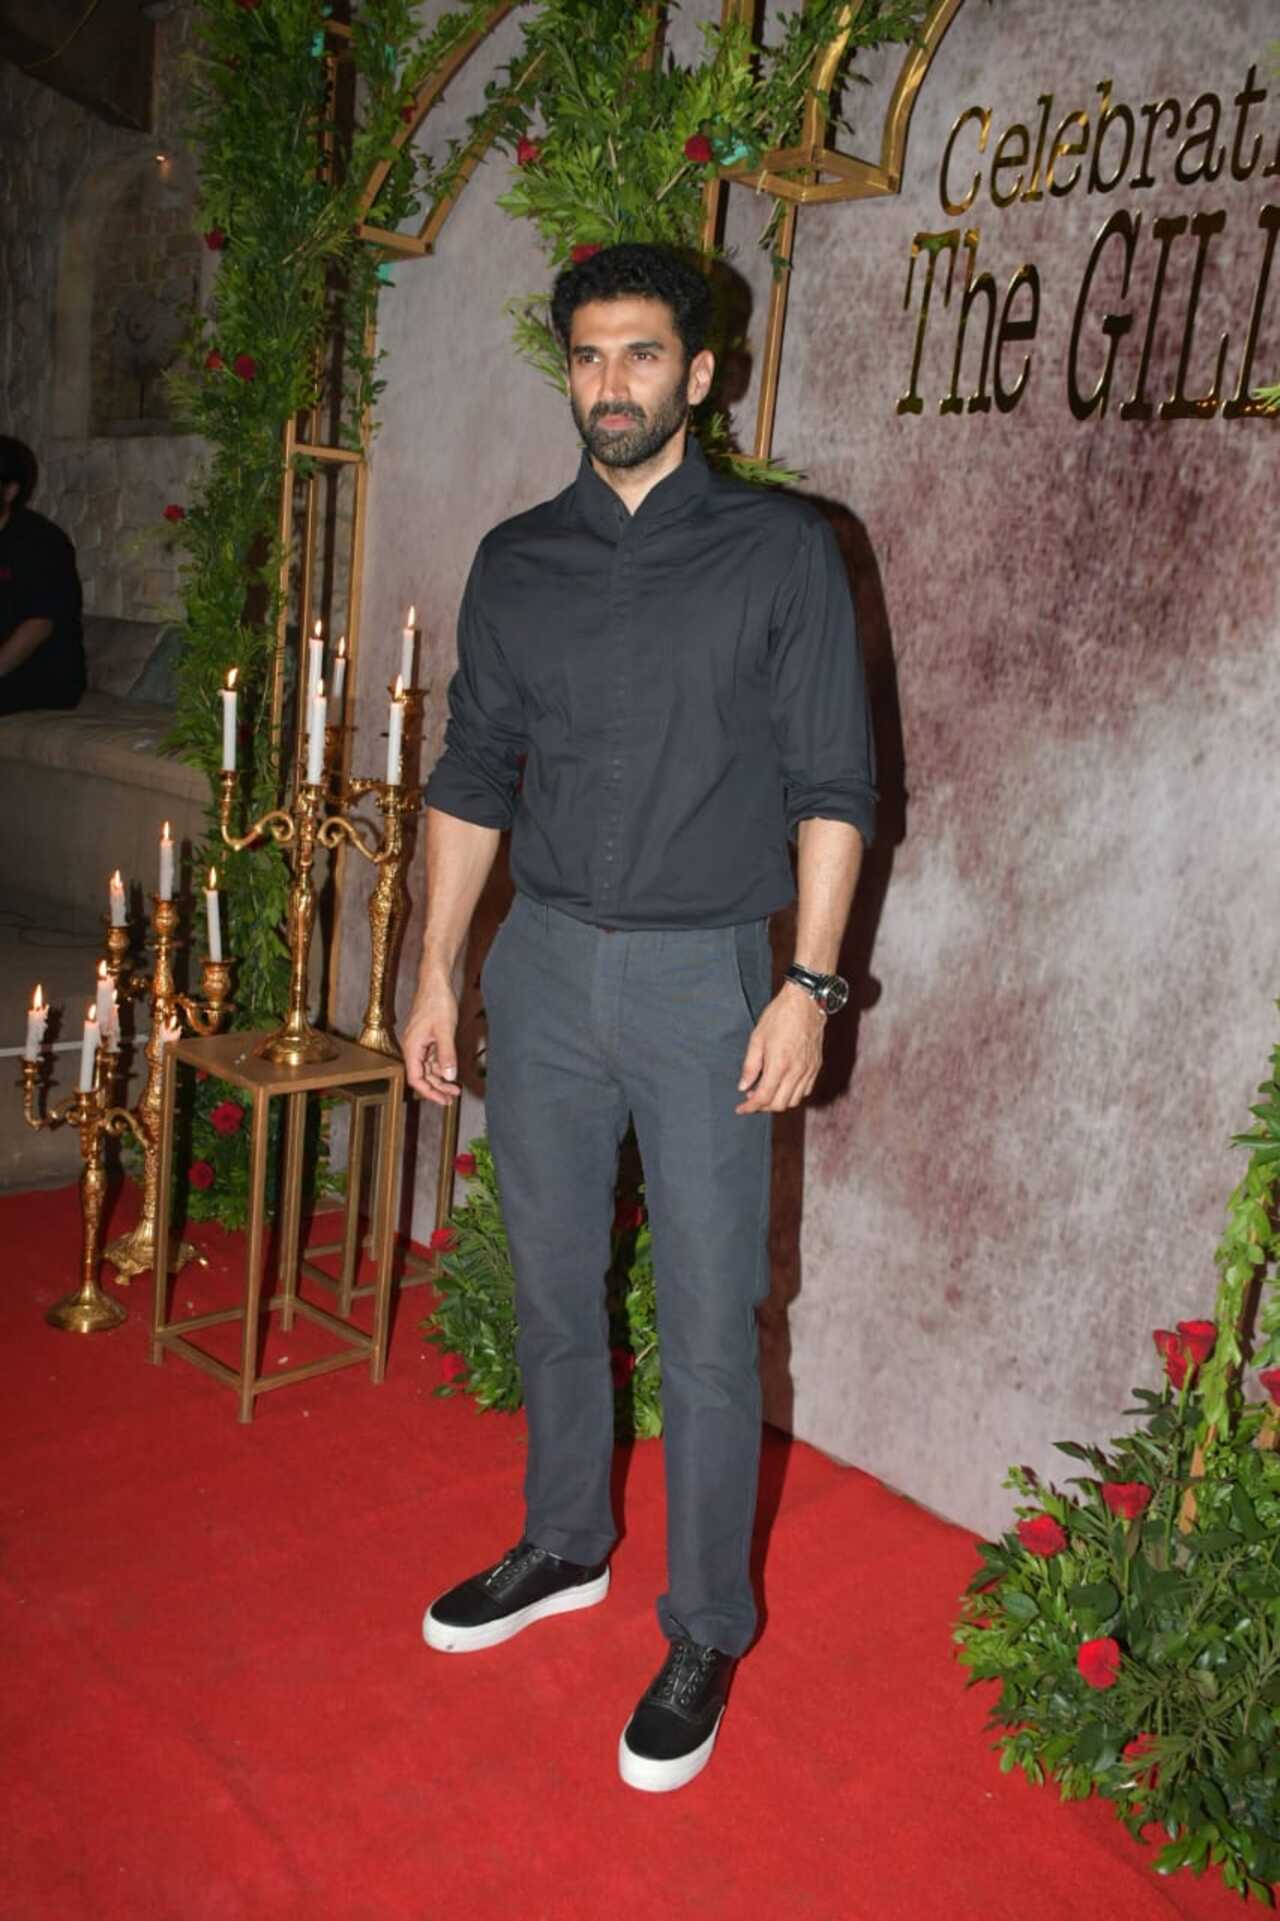 The actor wore a black shirt and trousers for the celebration